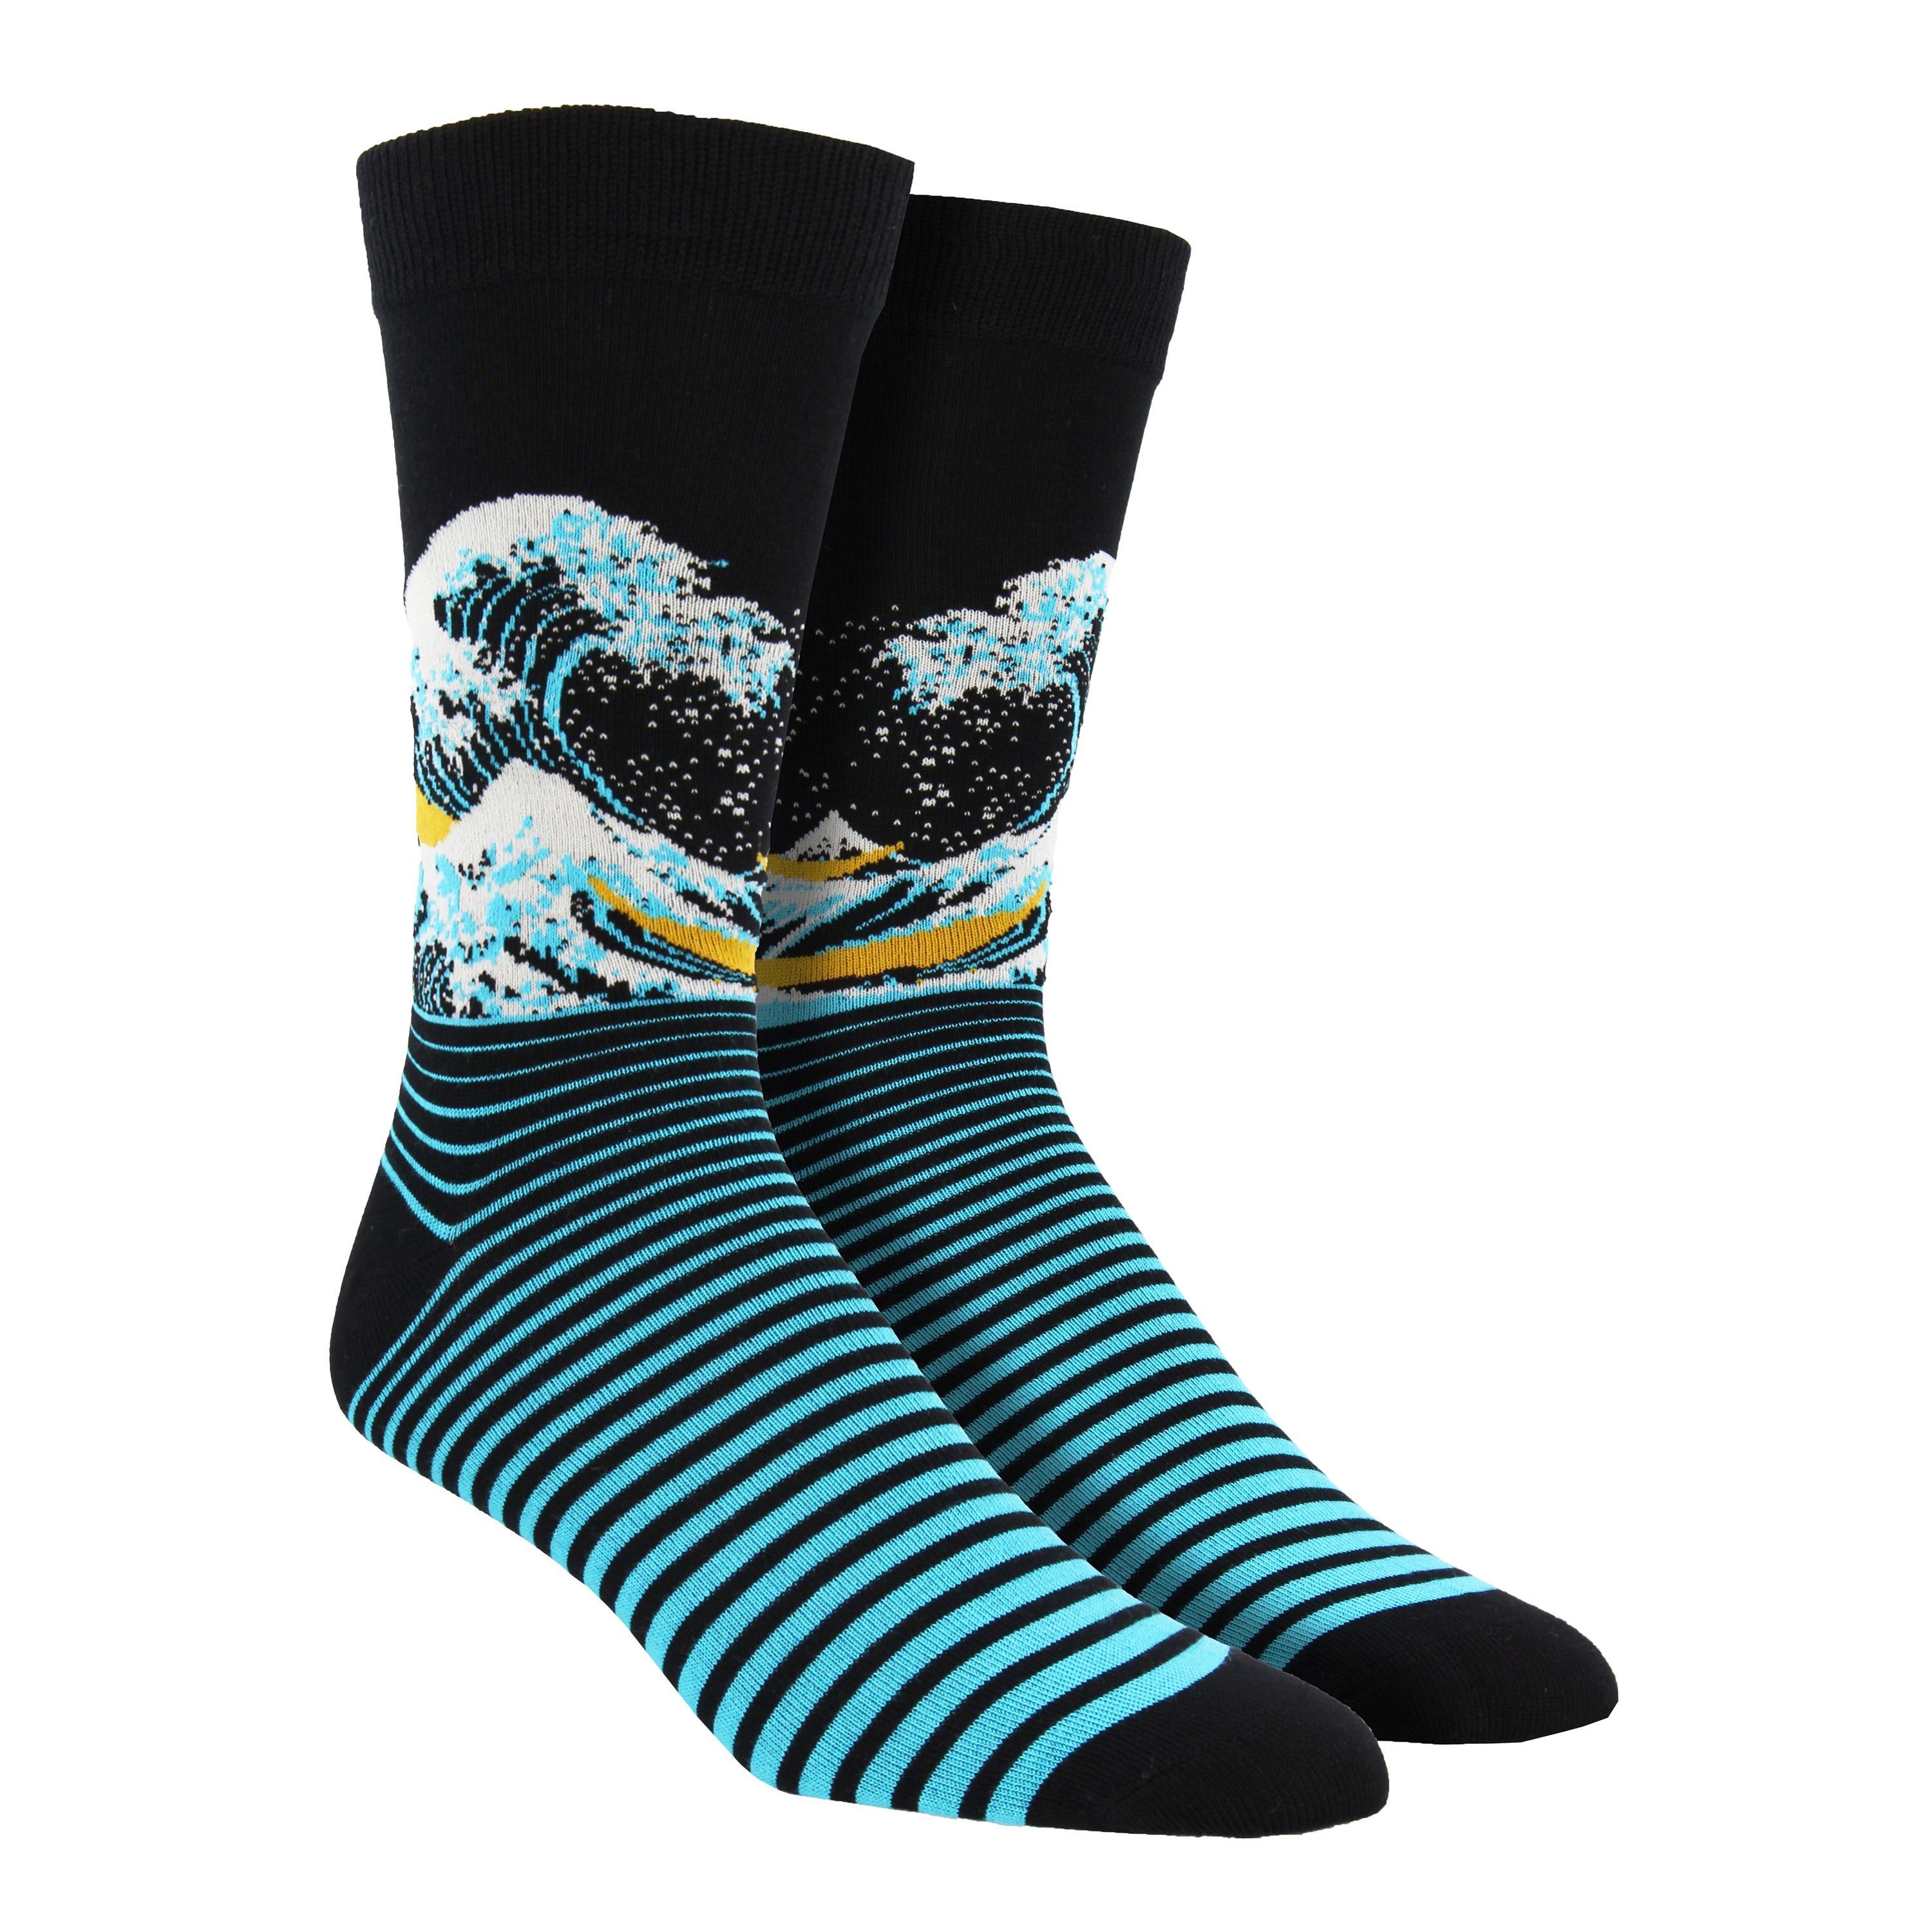 Shown on a leg form, these black and blue bamboo men's crew socks by the brand Socksmith are based on the famous print The Great Wave by the Japanese artist Hokusai.